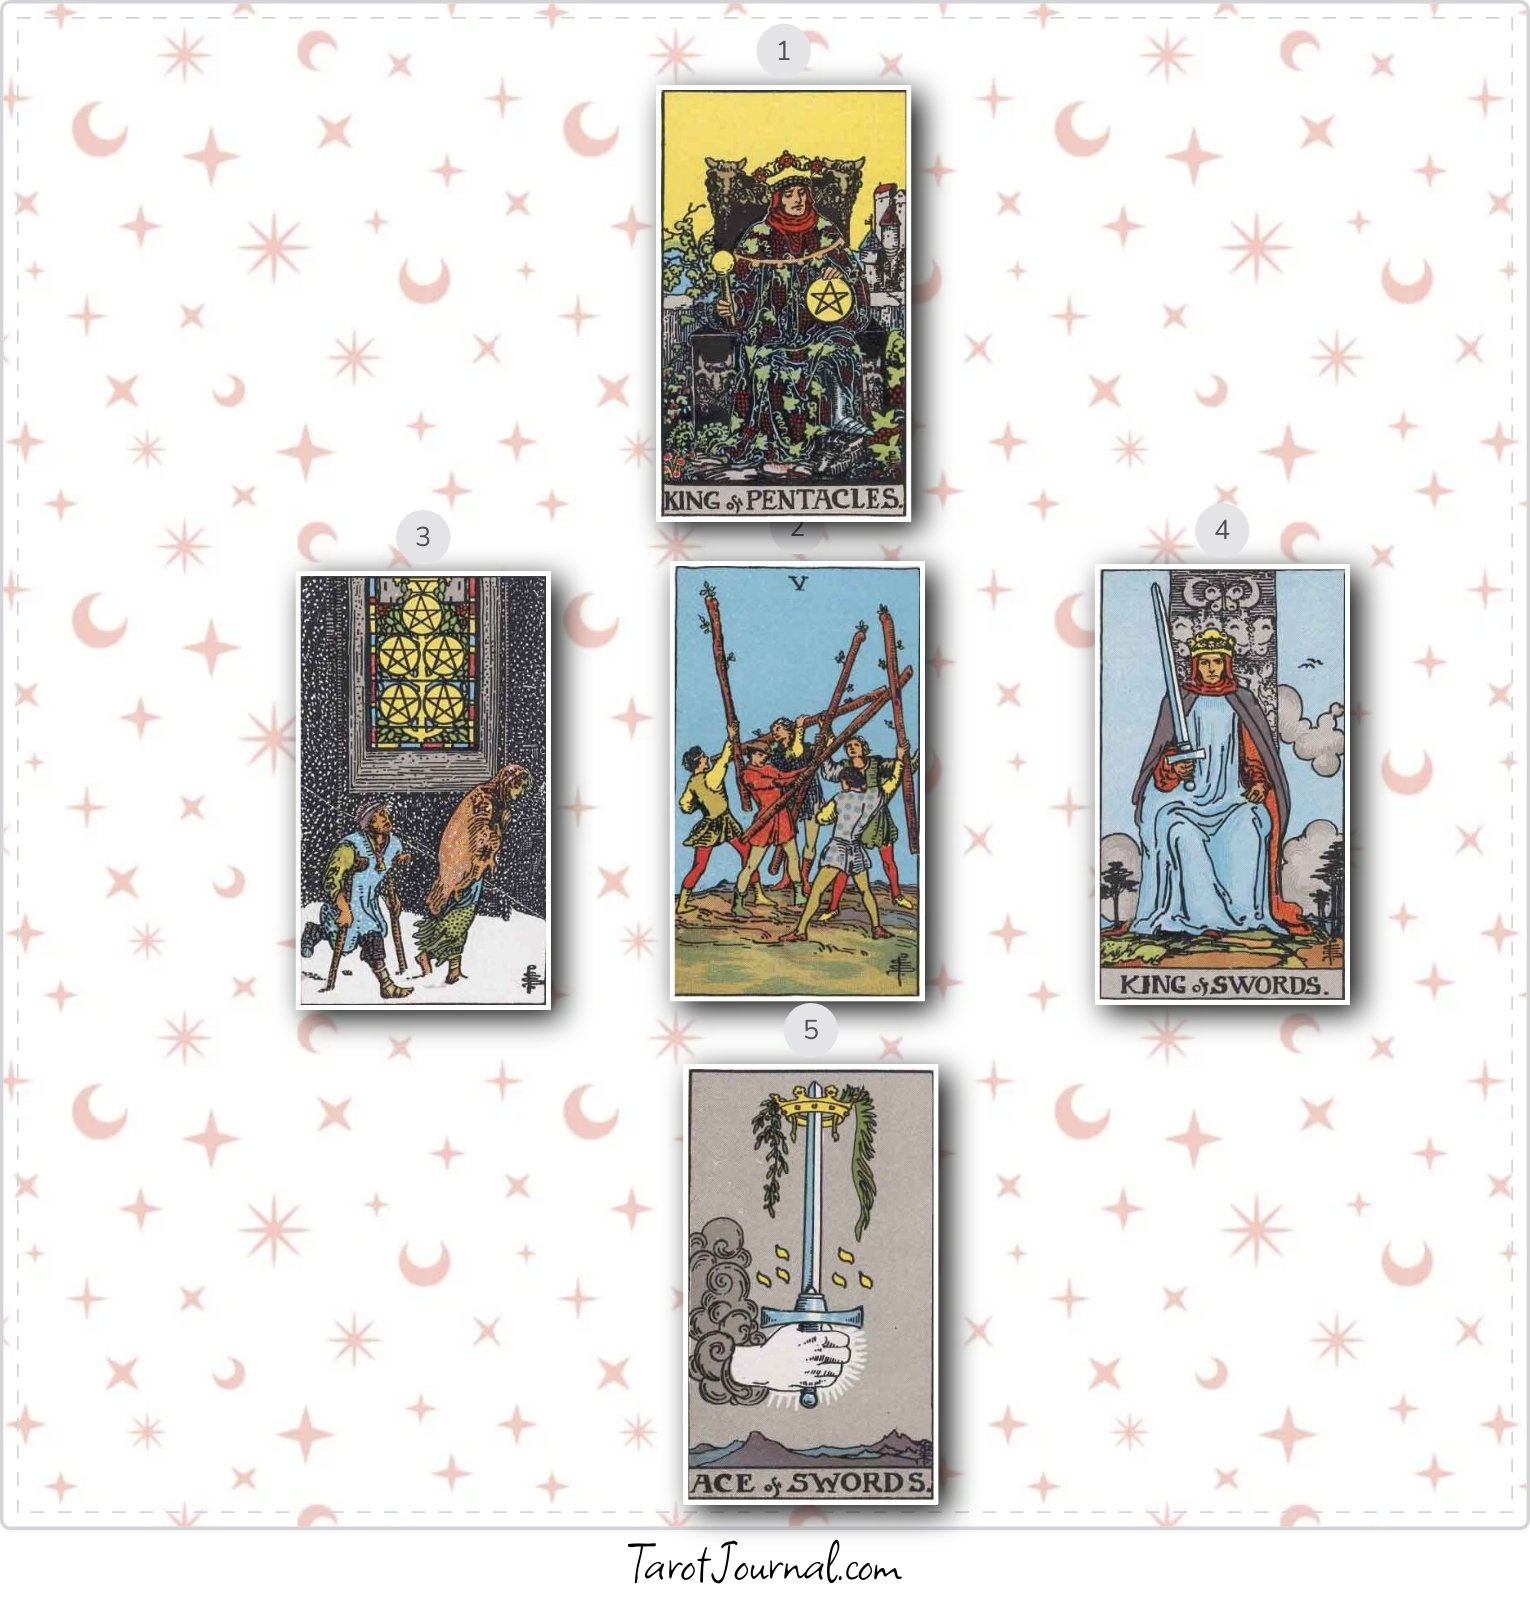 What is my dream job? - tarot reading by Huyen Le